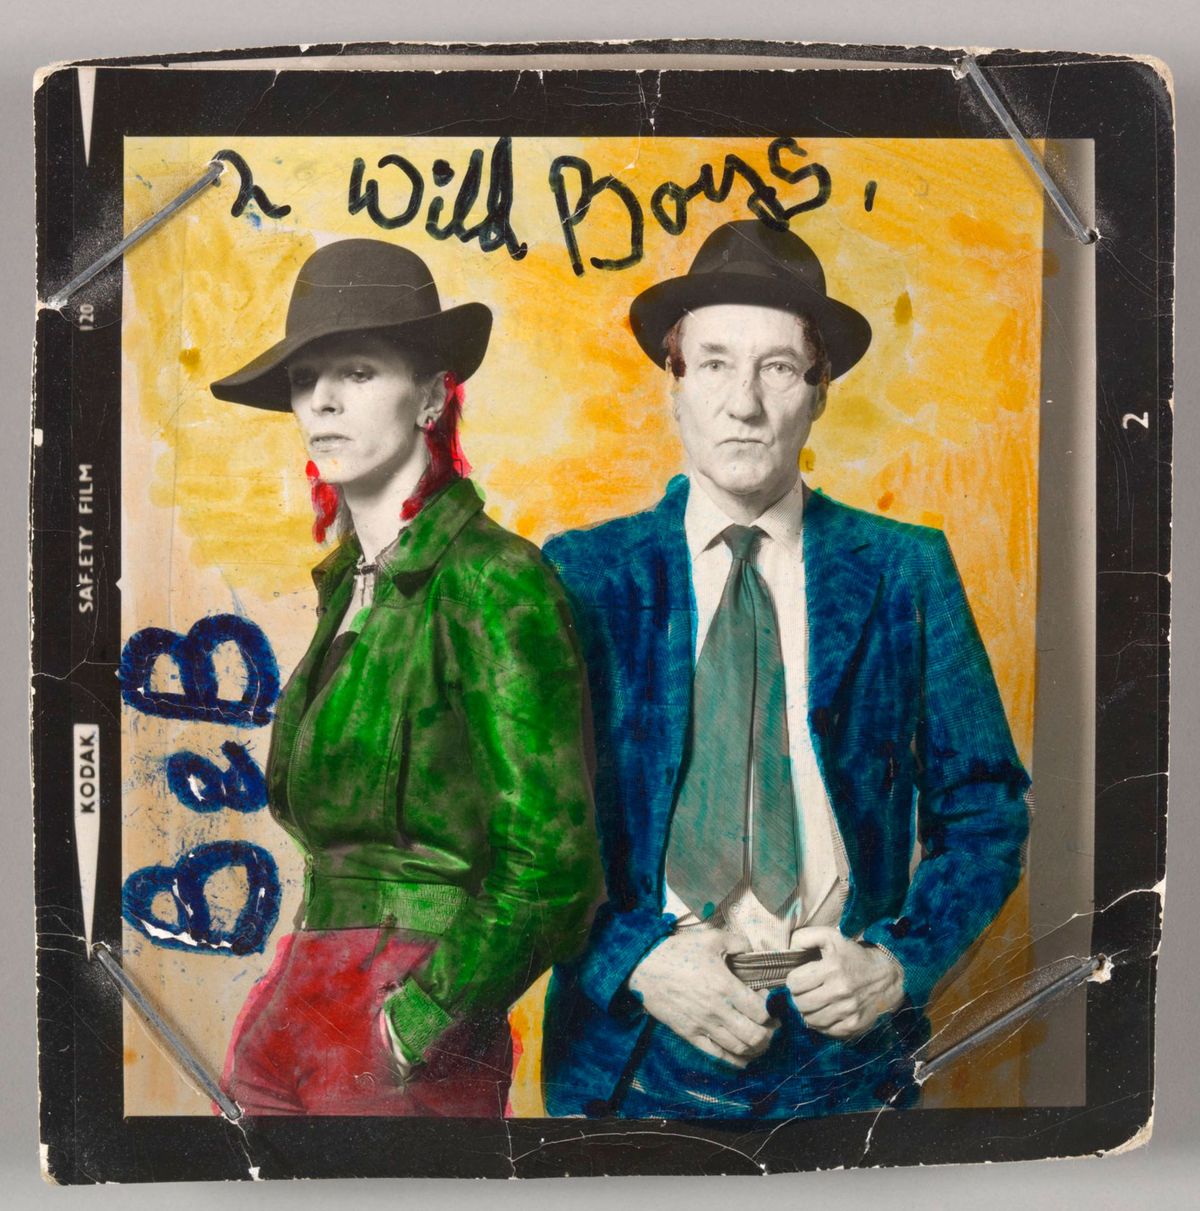 David Bowie with William Burroughs, February 1974 Victoria and Albert Museum; Photograph by Terry O'Neill with colour by David Bowie. Courtesy of The David Bowie Archive.